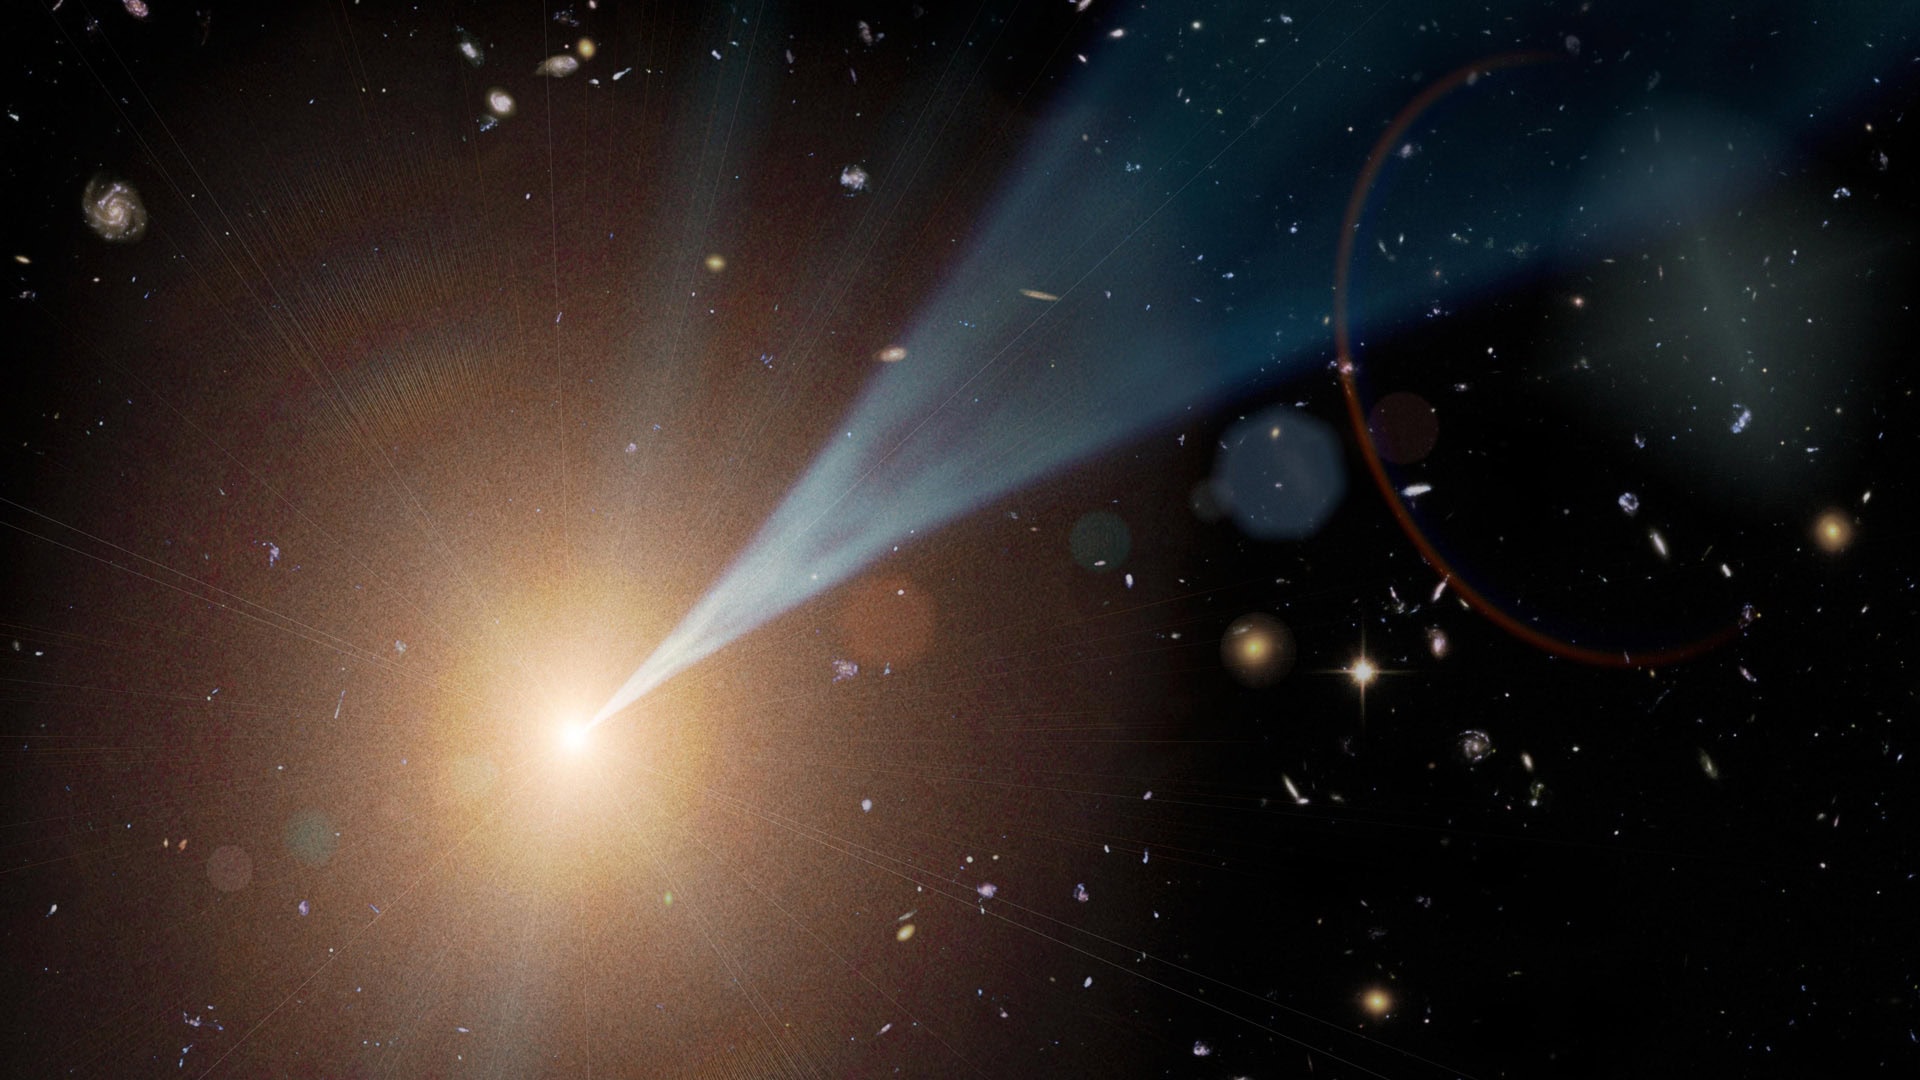 Supermassive Black Holes Can Change Direction of Their Powerful Jets